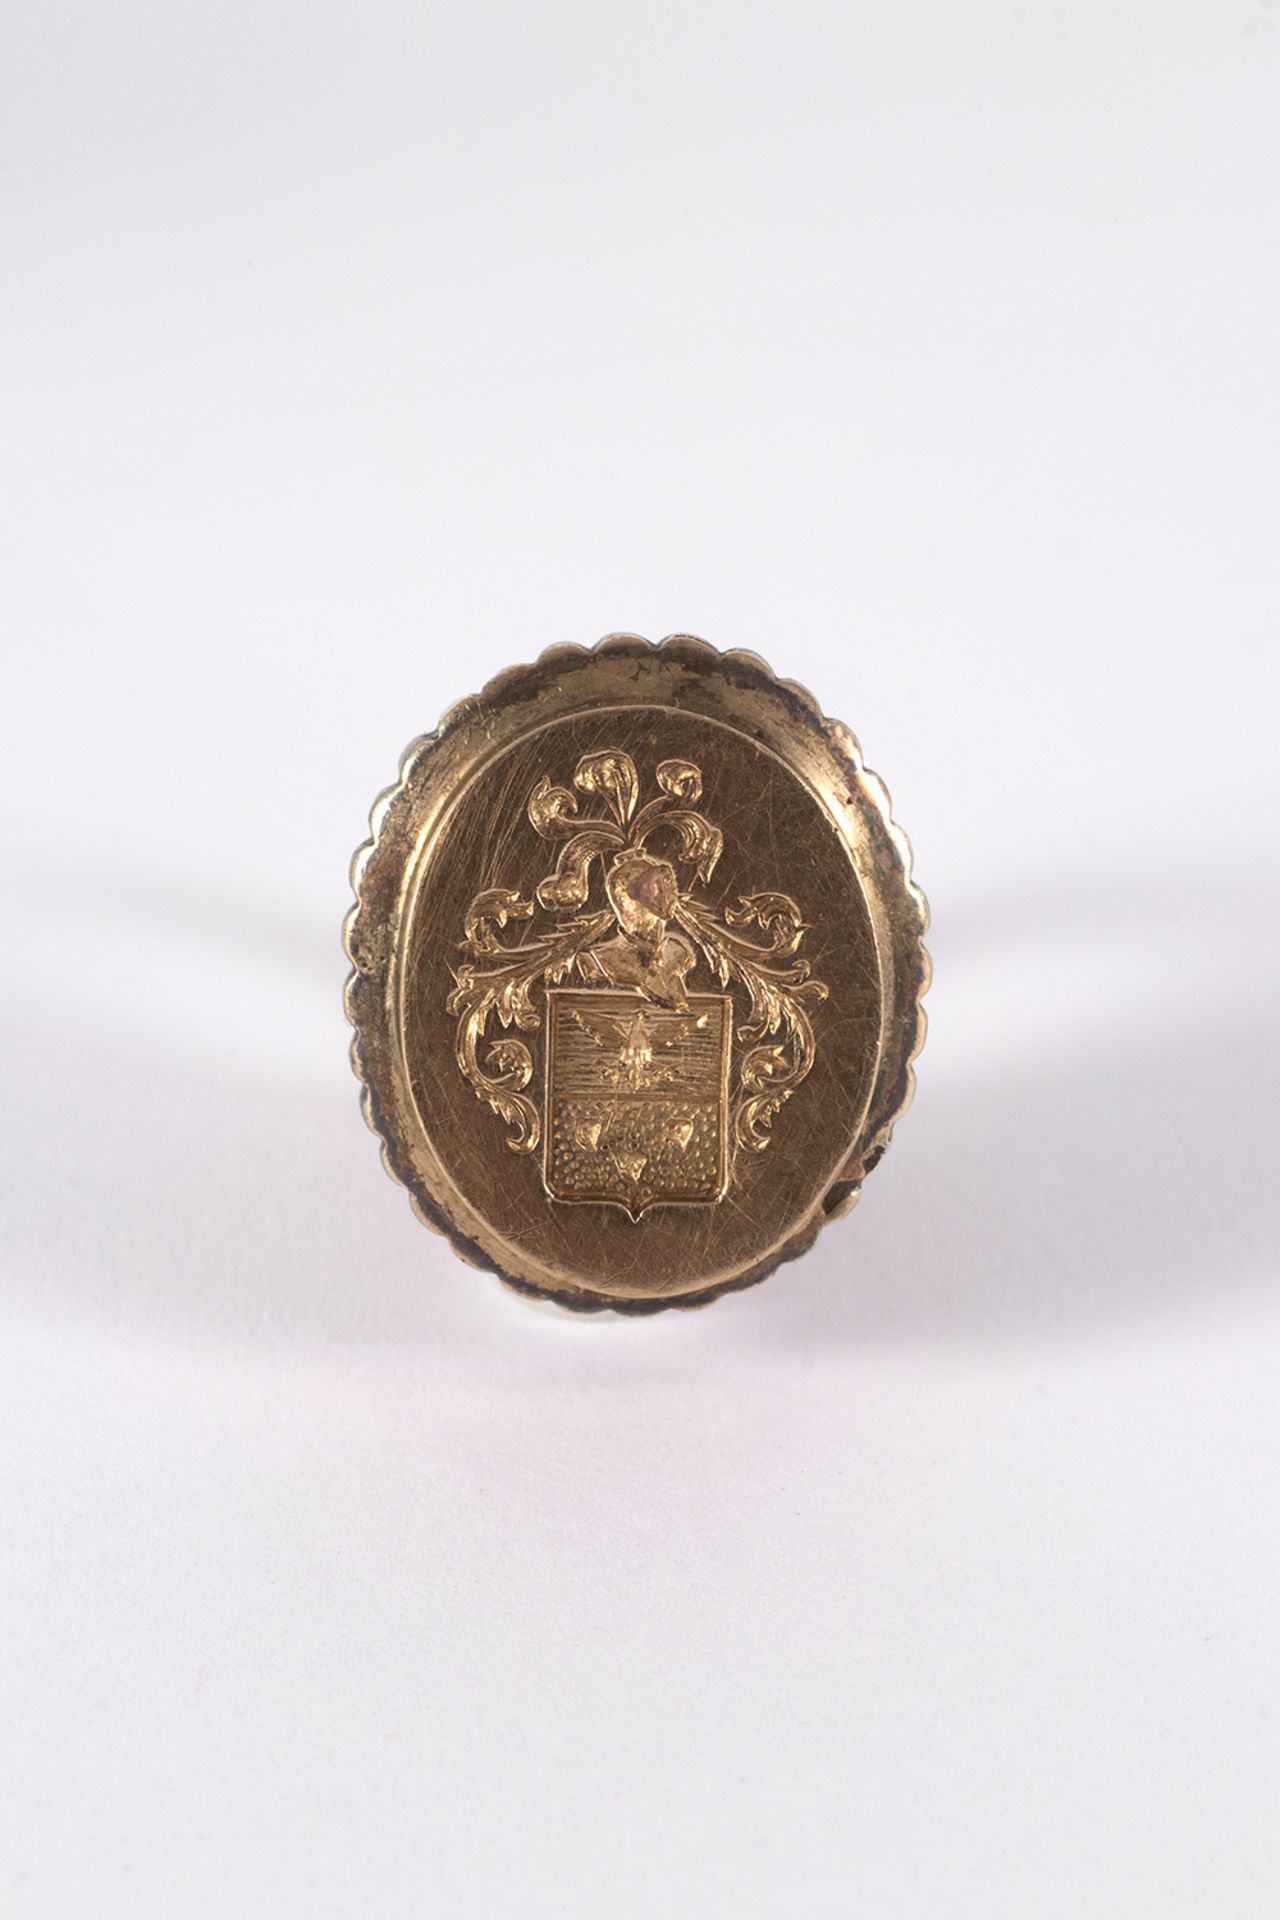 Seal pendant in gold and silver with heraldic shield.